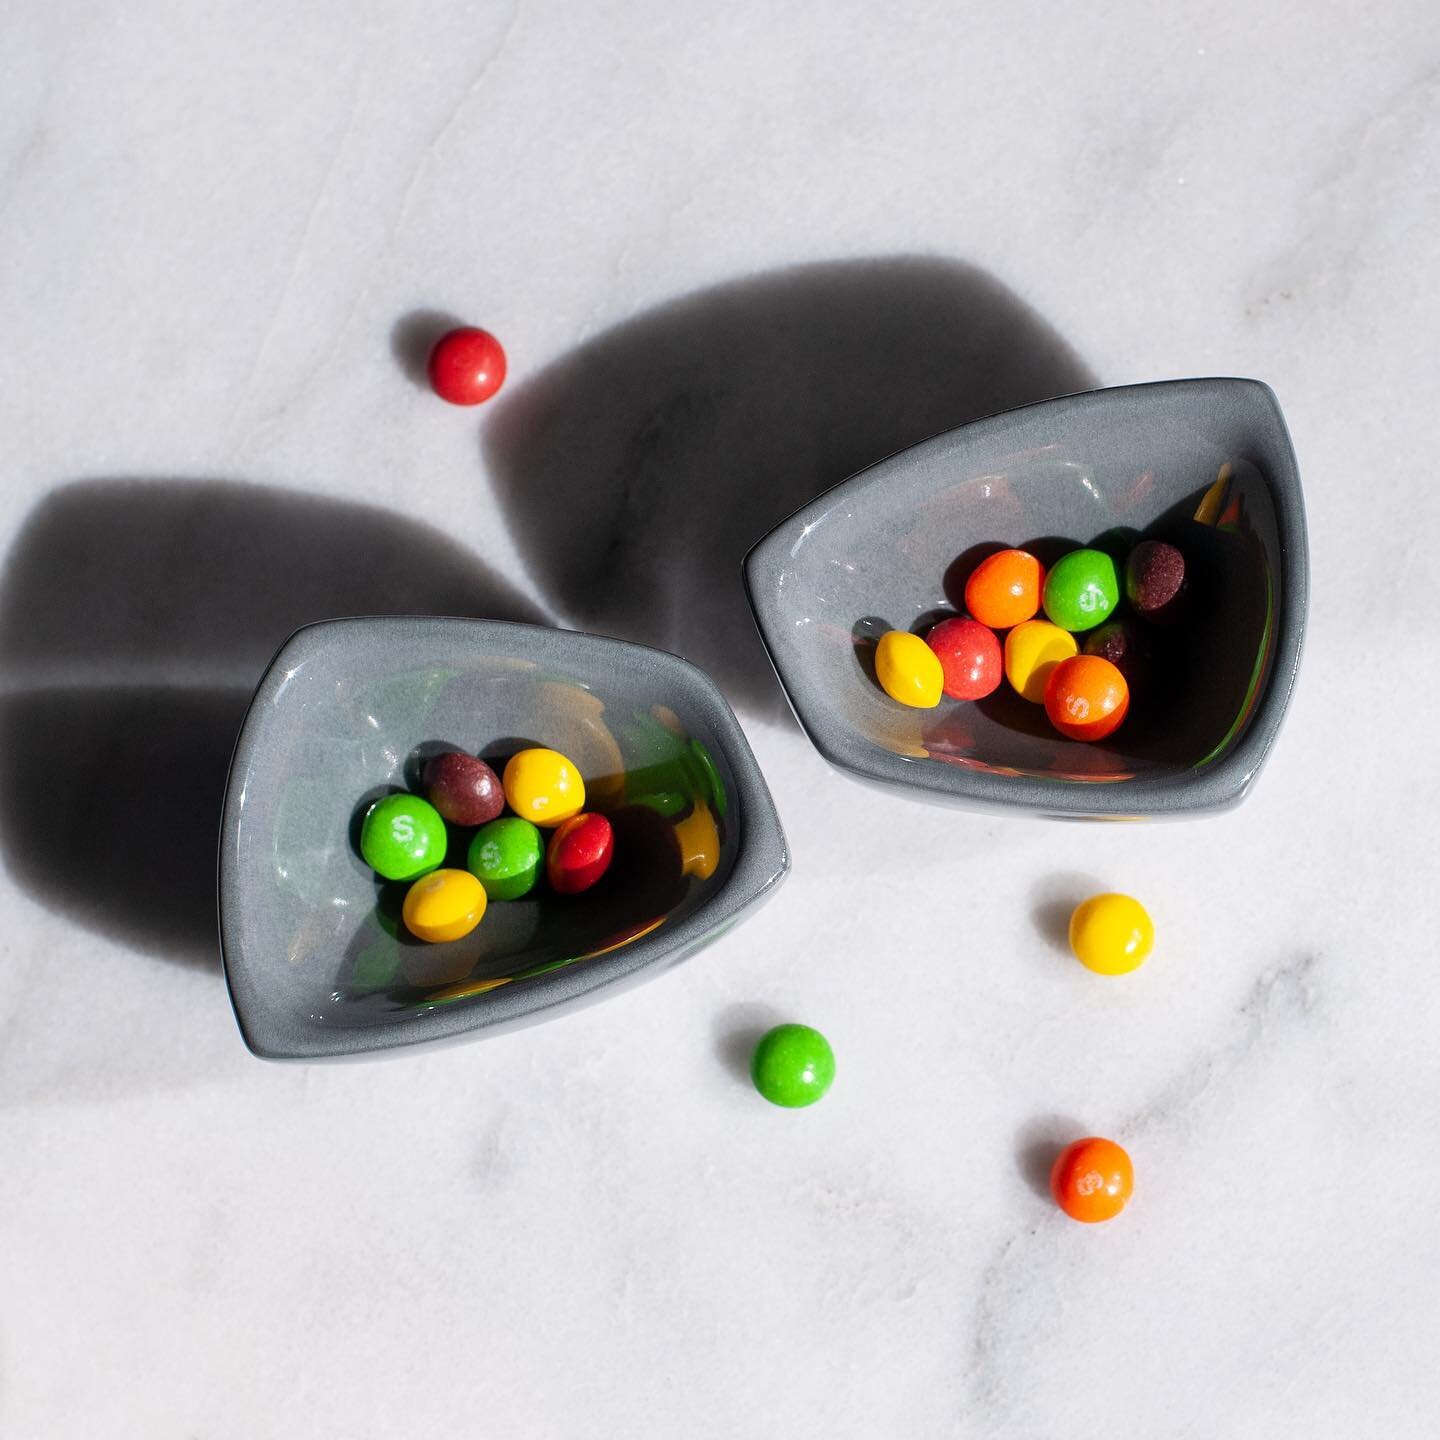 Skittles for scale. ⚡️RAFFLE ⚡️ for #CTFDIY 
Only a few days to get your tickets in to win BOTH of these pinch bowls! Tickets are $10 - purchase as many as you&rsquo;d like for more chances to win! 

🫧venmo - @ Stormie-Burns - drop your instagram ha